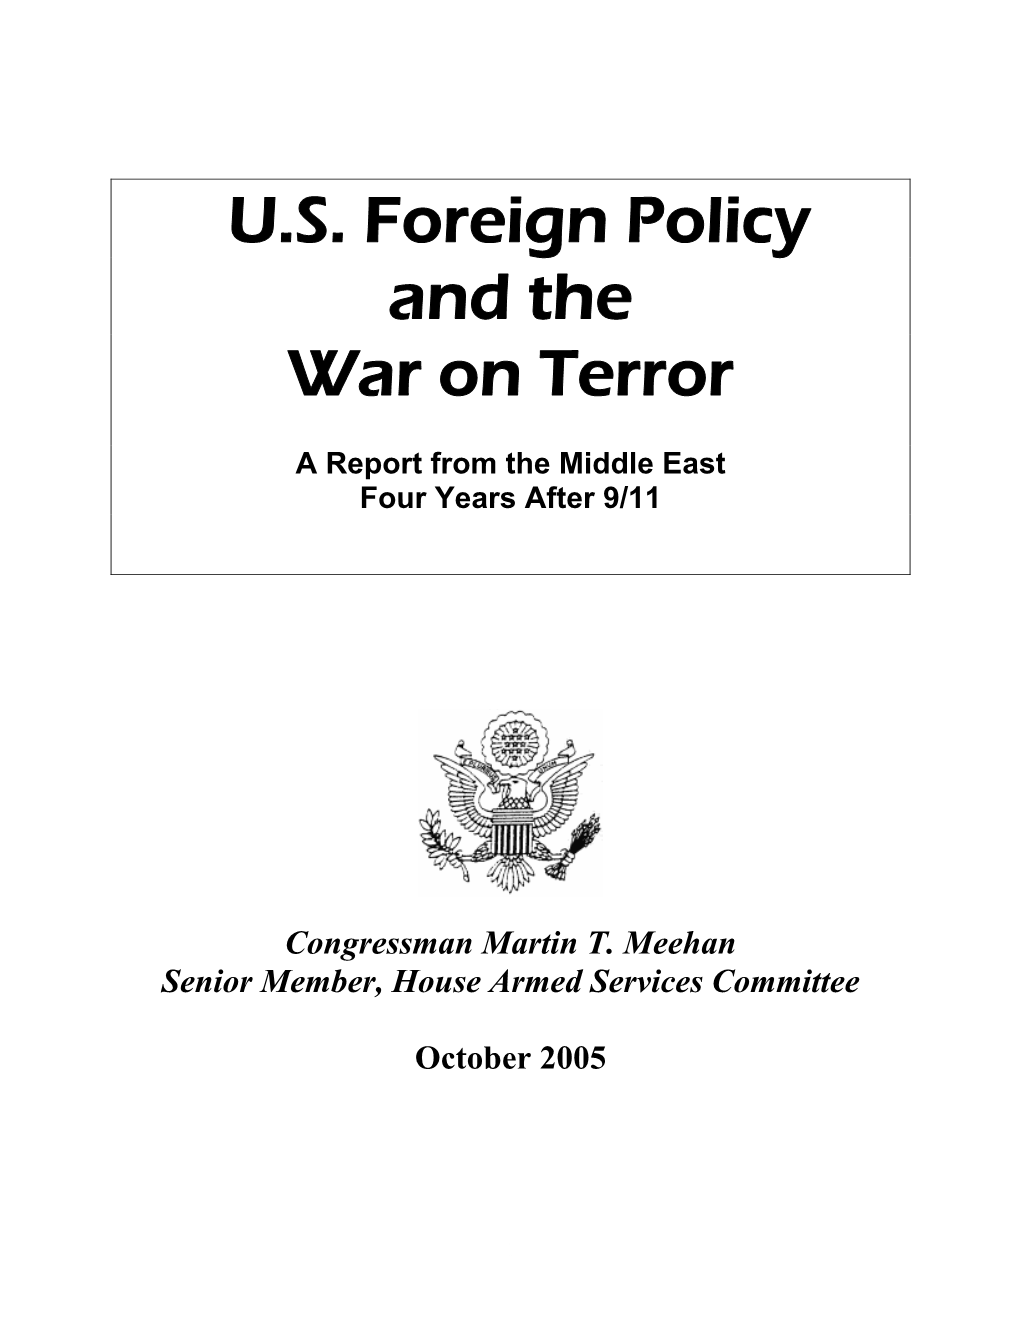 U.S. Foreign Policy and the War on Terror